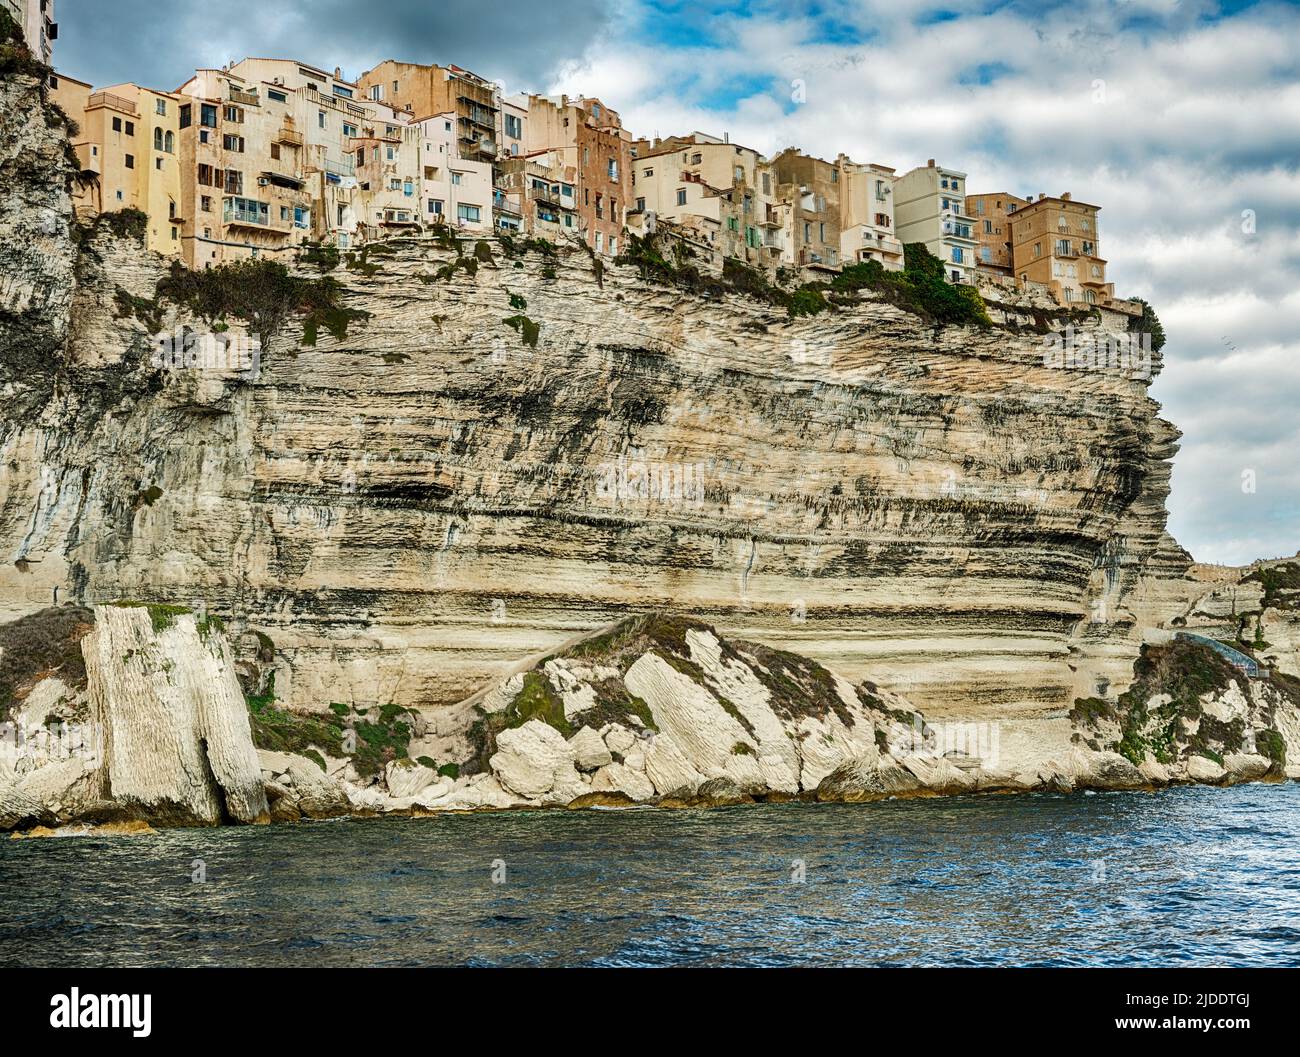 The city of Bonifacio in Corsica is perched on the edge of stone cliffs looking over the Tyrrhenian Sea. Stock Photo